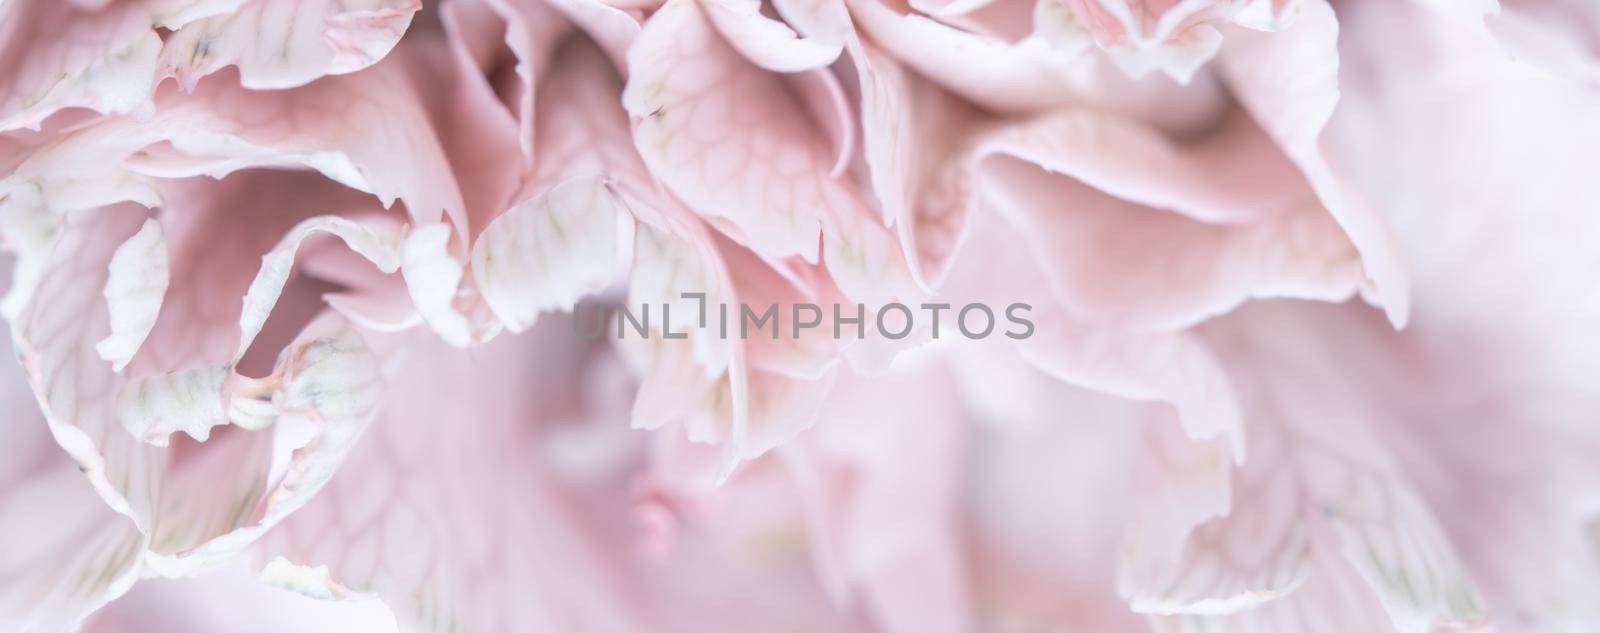 Abstract floral background, pale pink carnation flower petals. Macro flowers backdrop for holiday brand design..